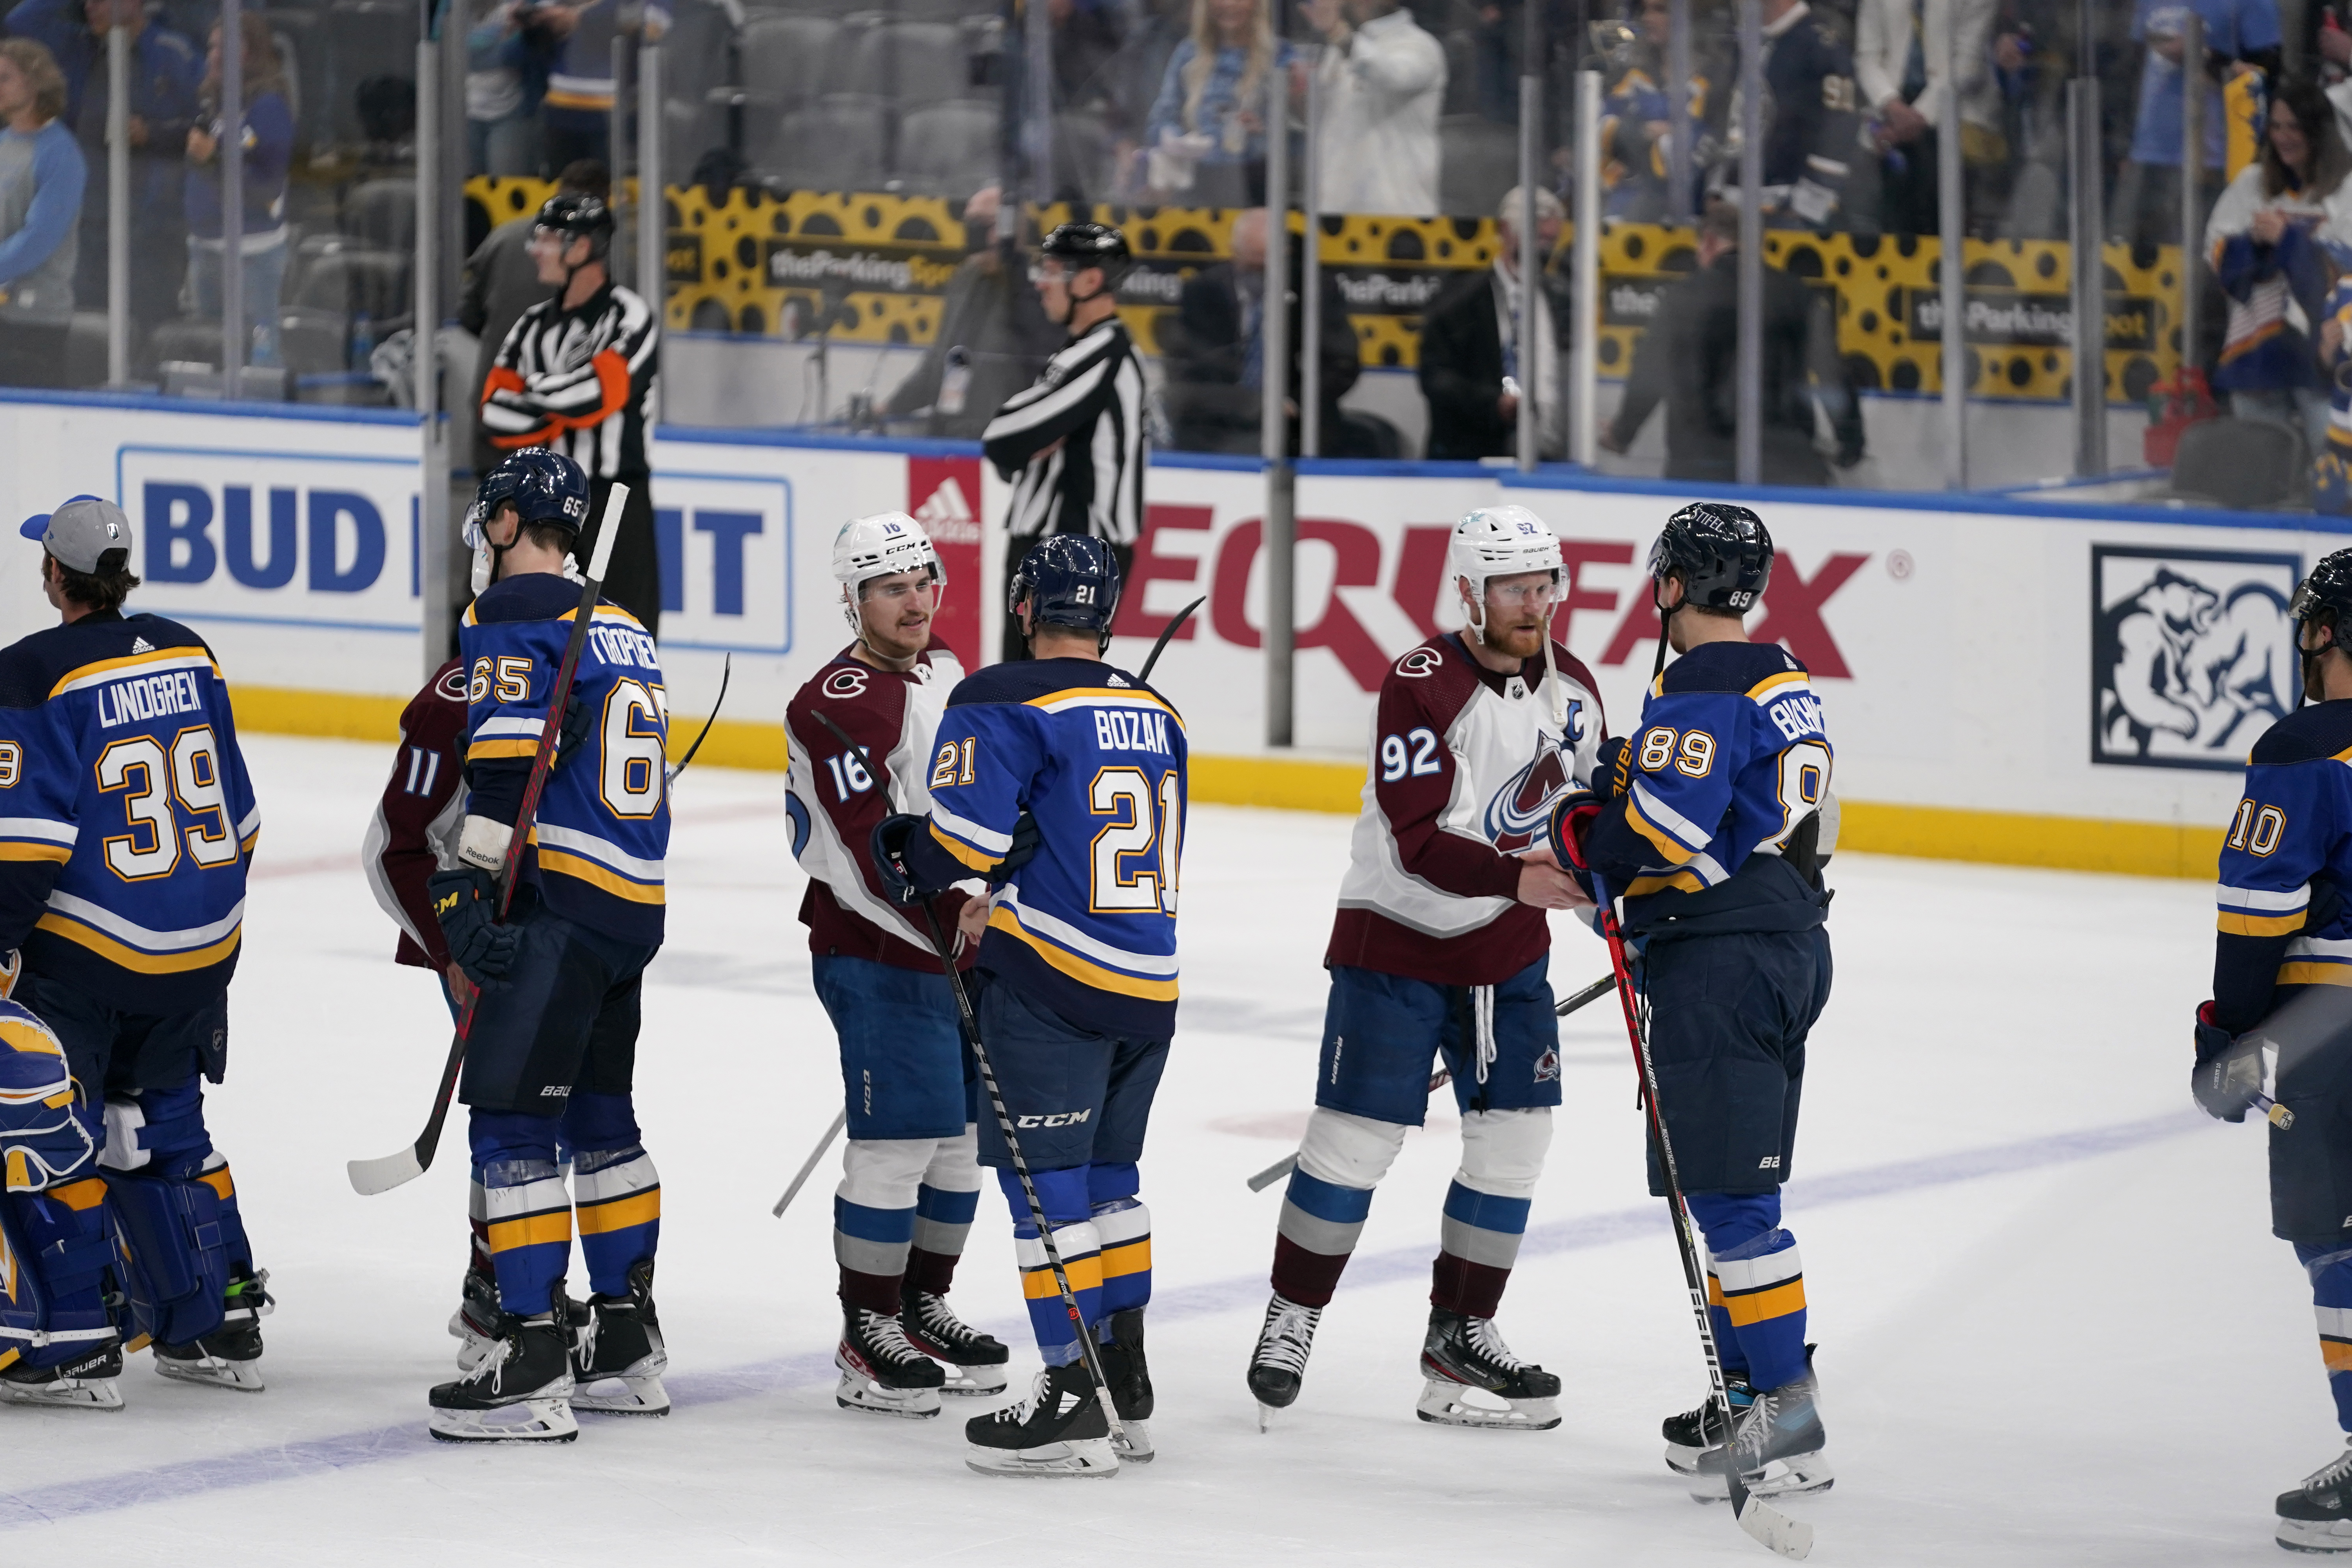 Avalanche advance to conference finals for 1st time since 2002